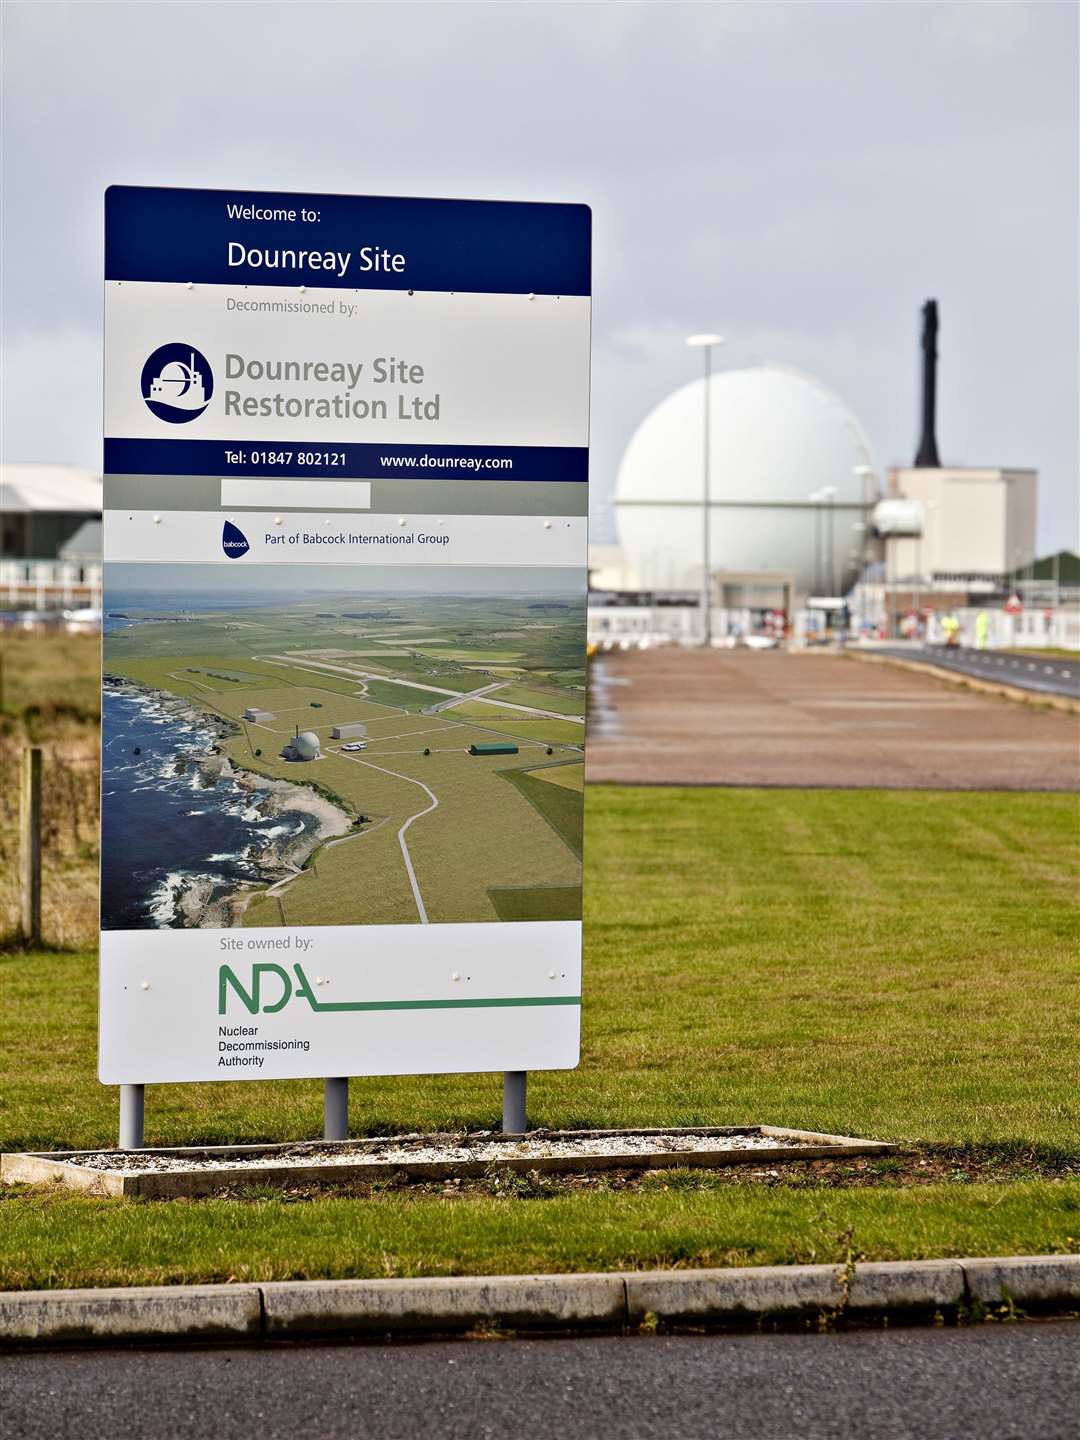 There was a rise in the number of particles found on the Dounreay foreshore this year.